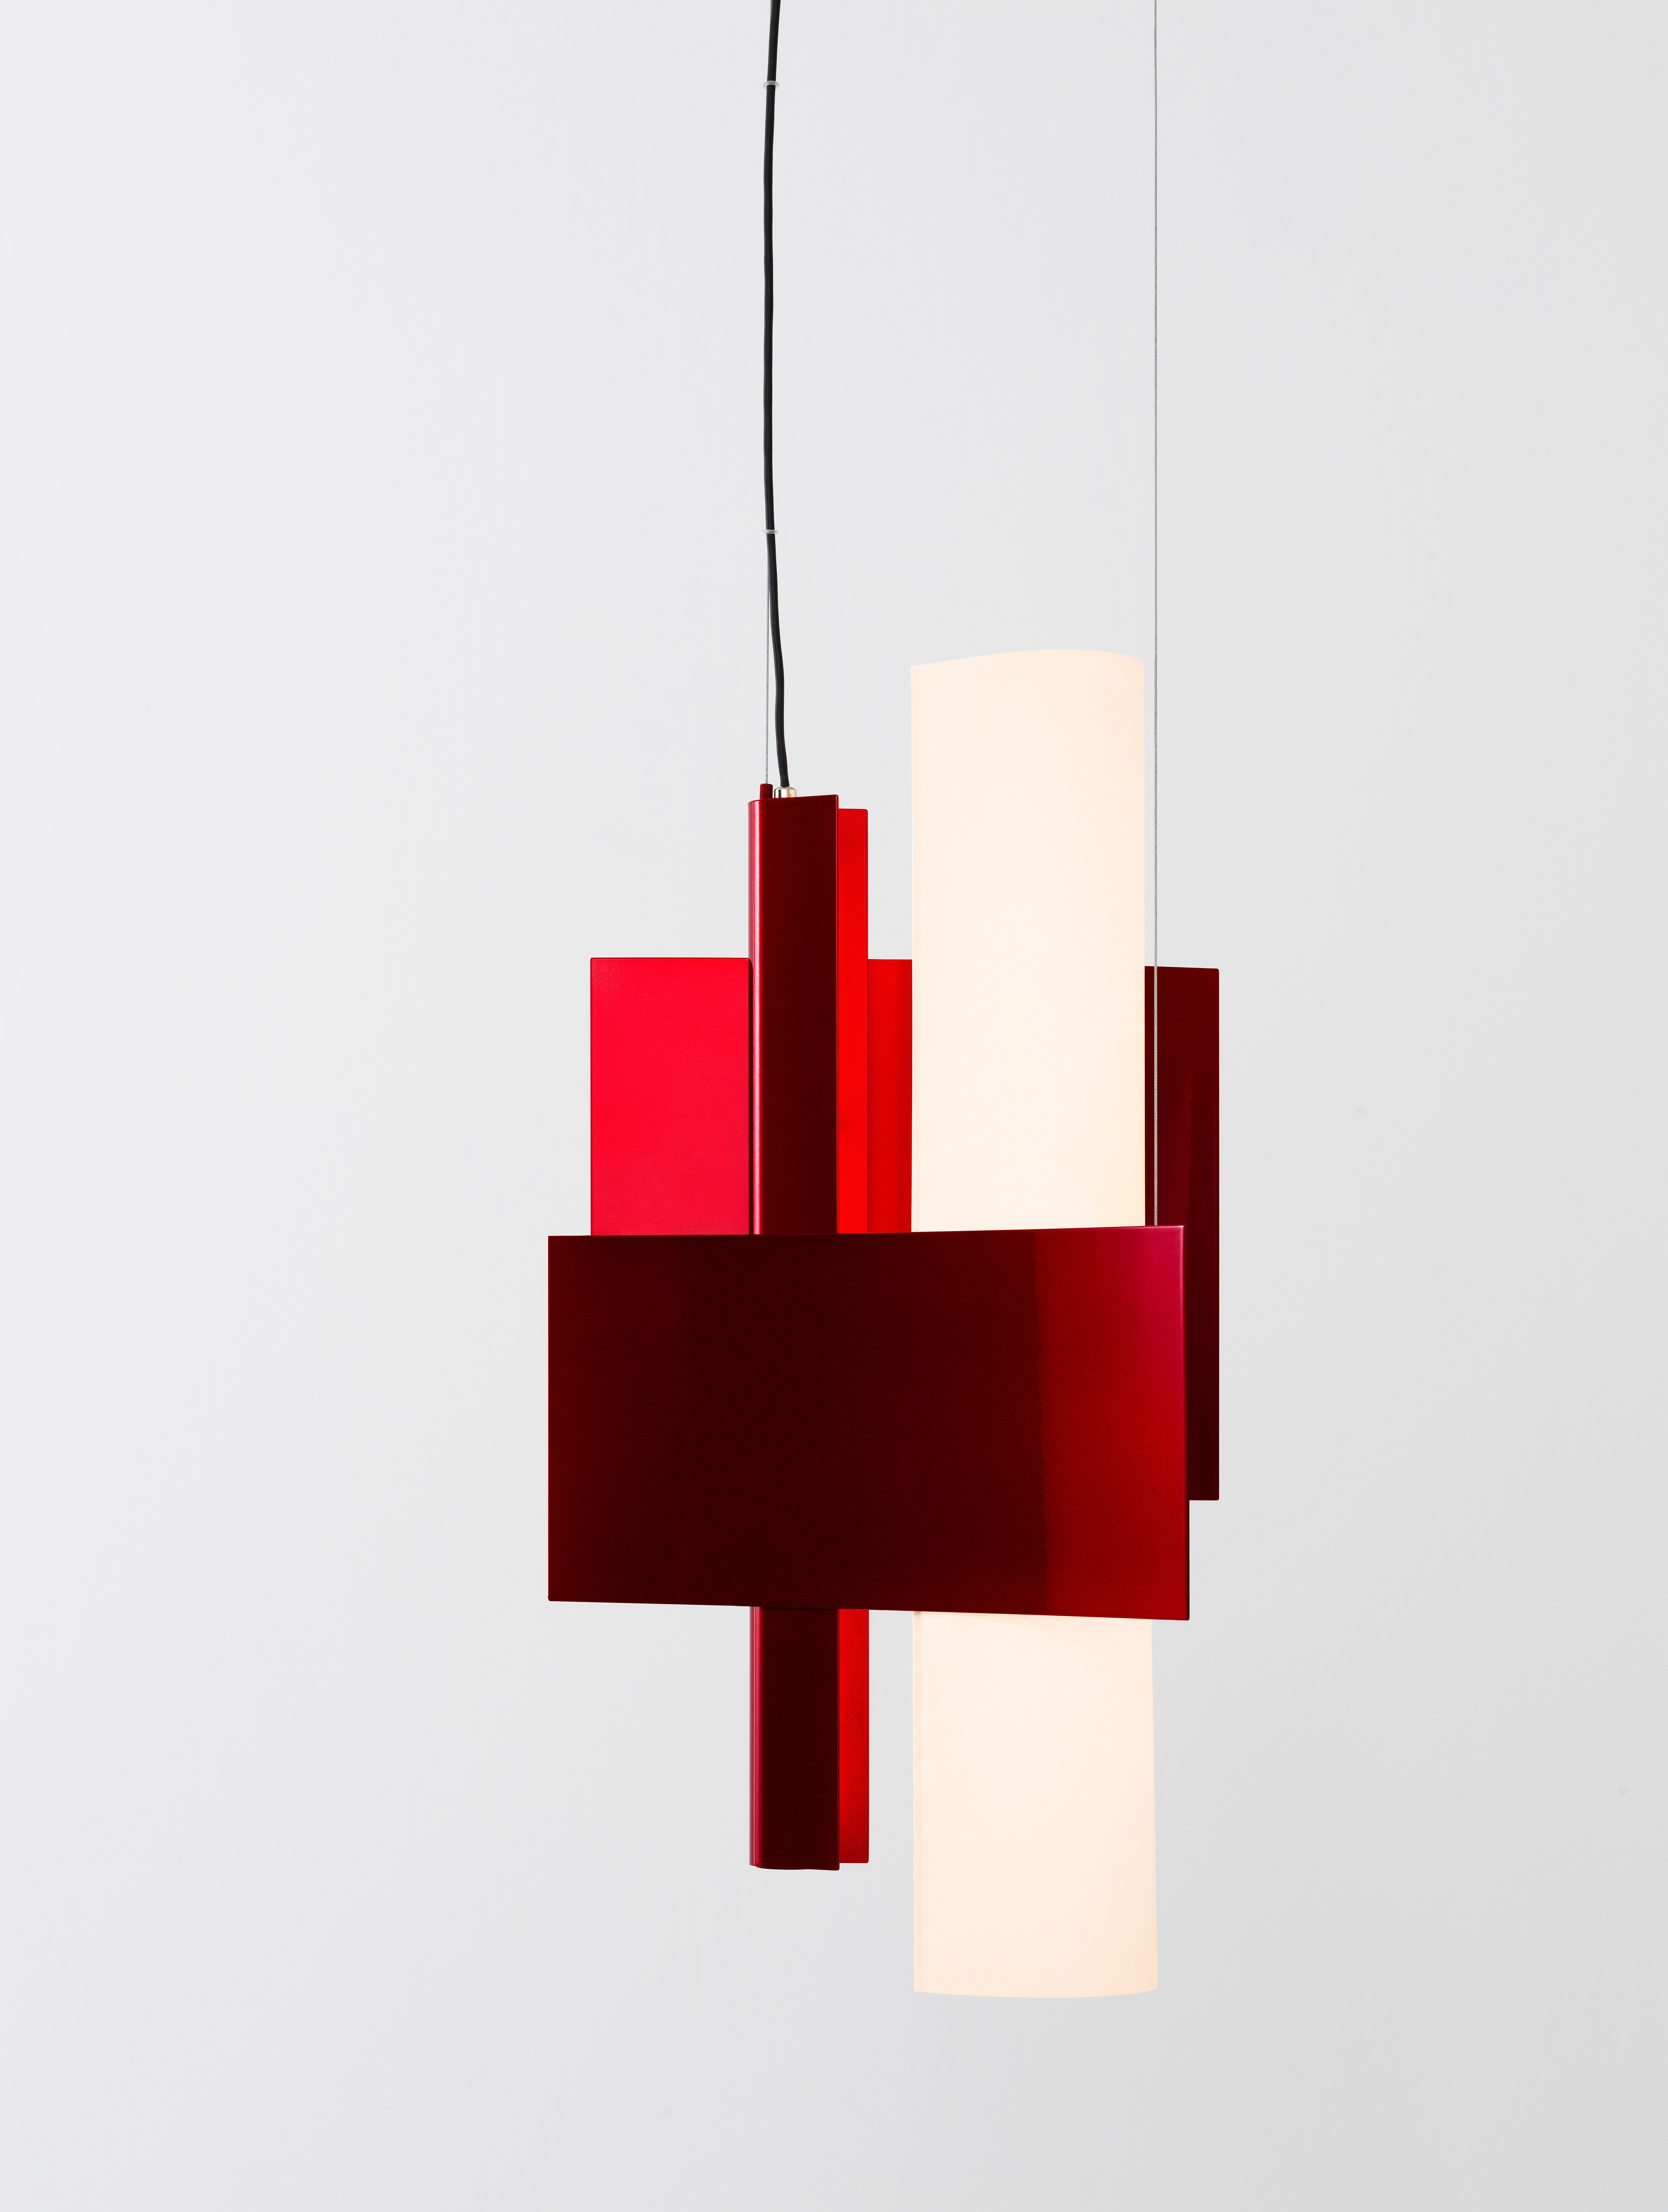 Inspired Forms in Lighting from Formafantasma and Maison Matisse.